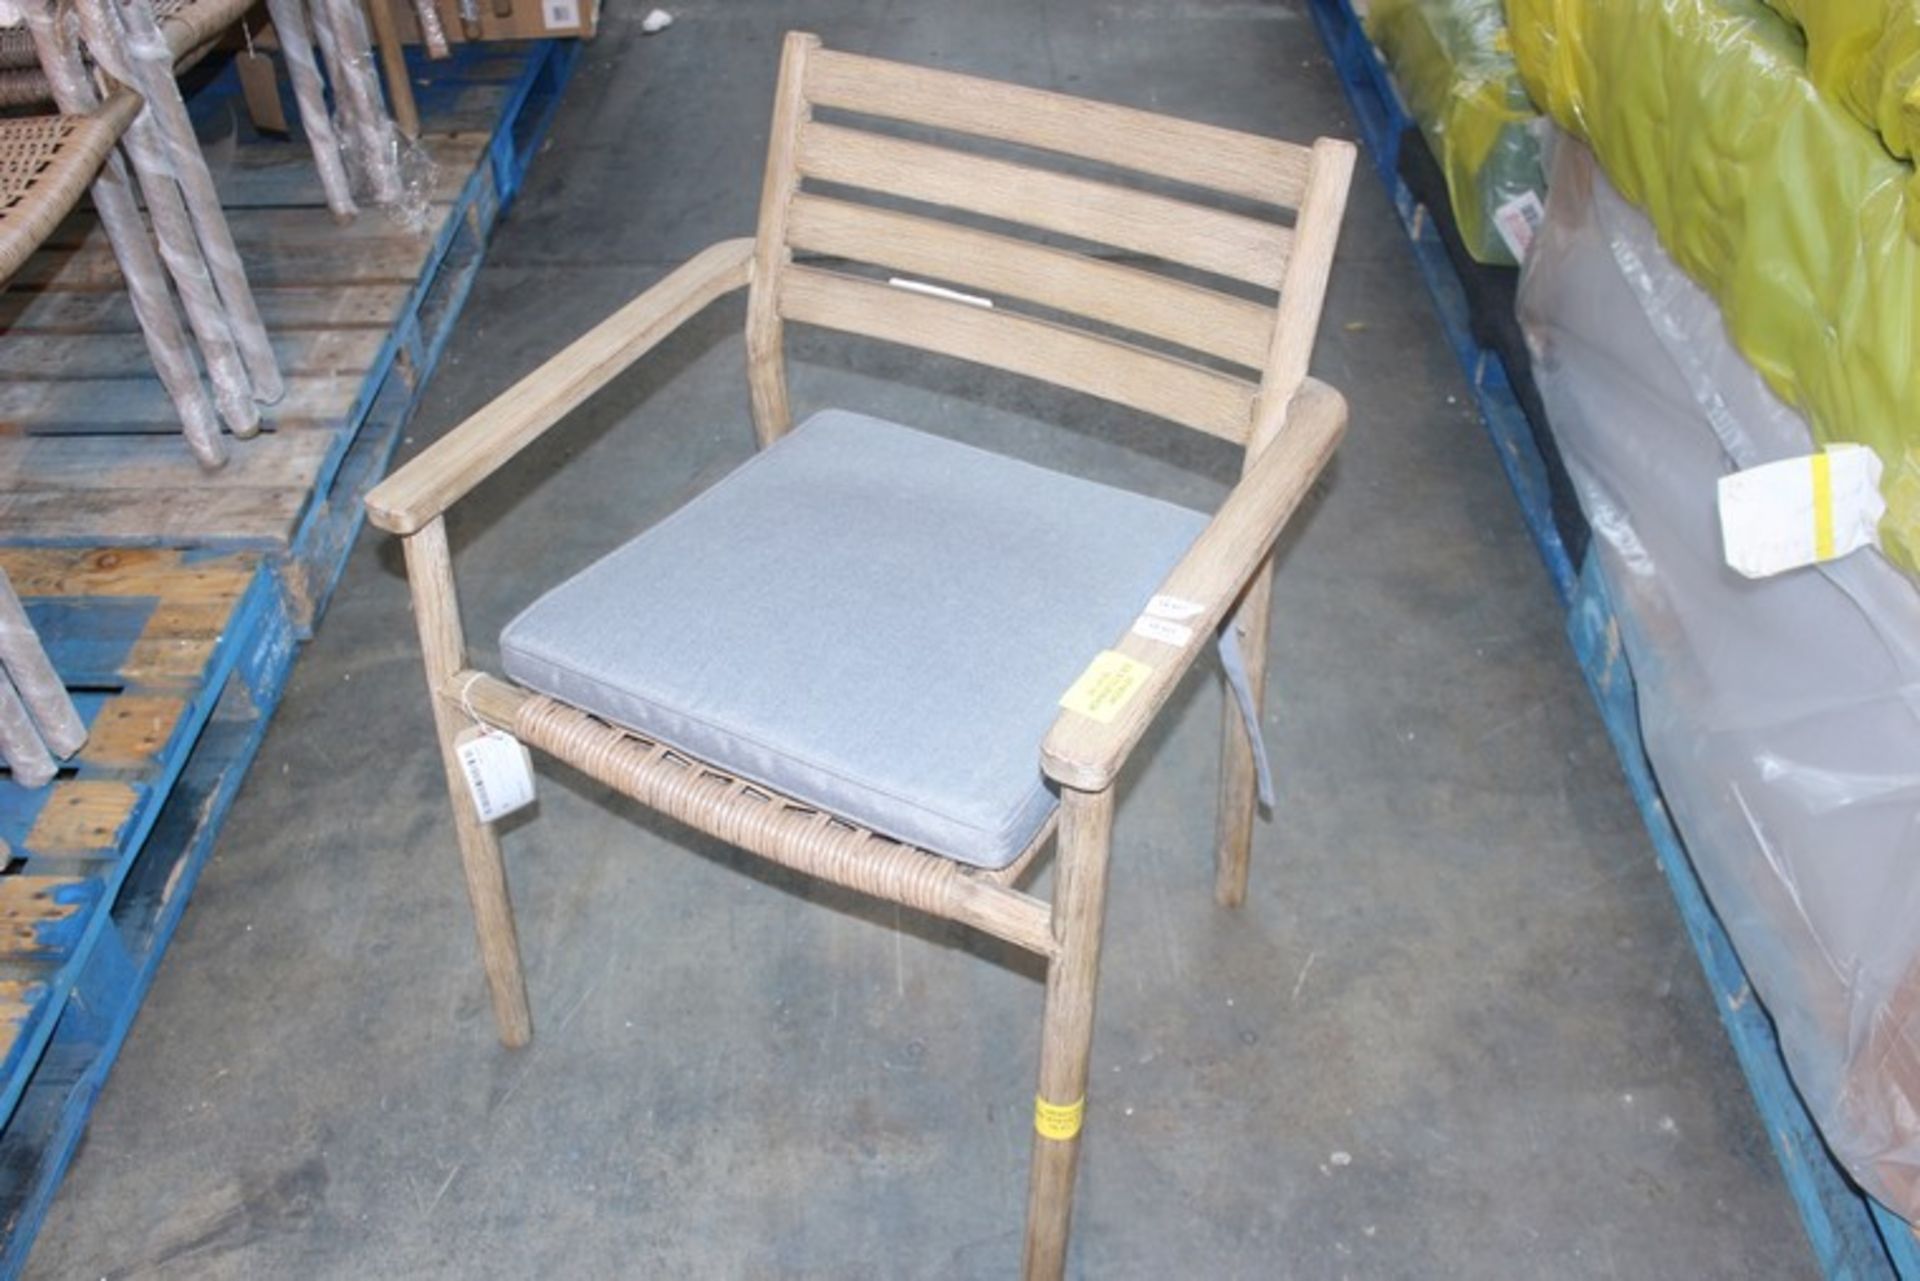 1 x ISLAY GARDEN DINING CHAIR (16.01.18) (82034602) (WITH CUSHIONS) *PLEASE NOTE THAT THE BID